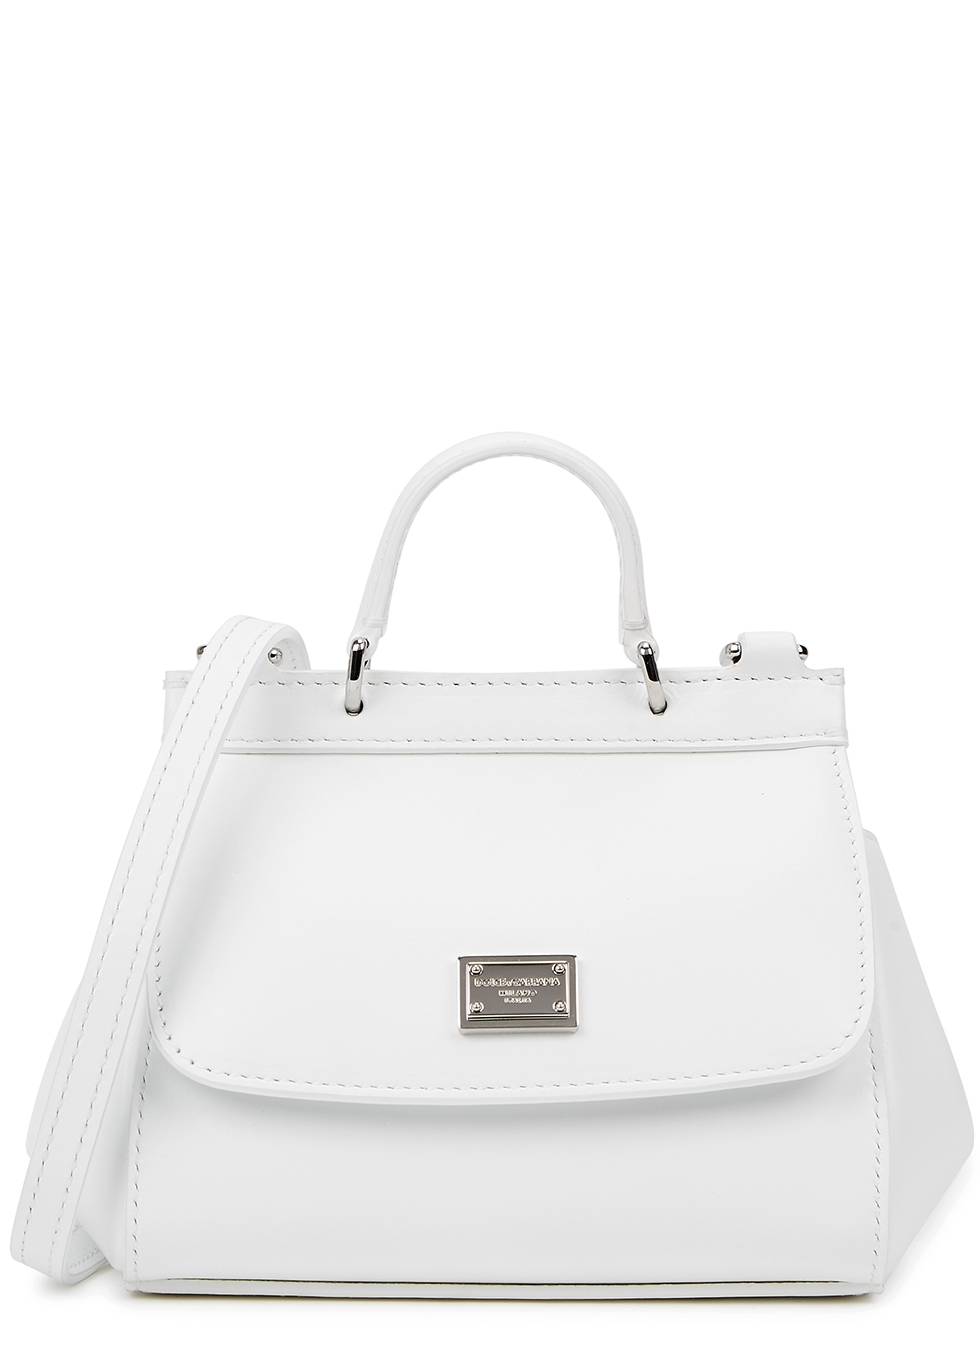 KIDS White leather top handle bag